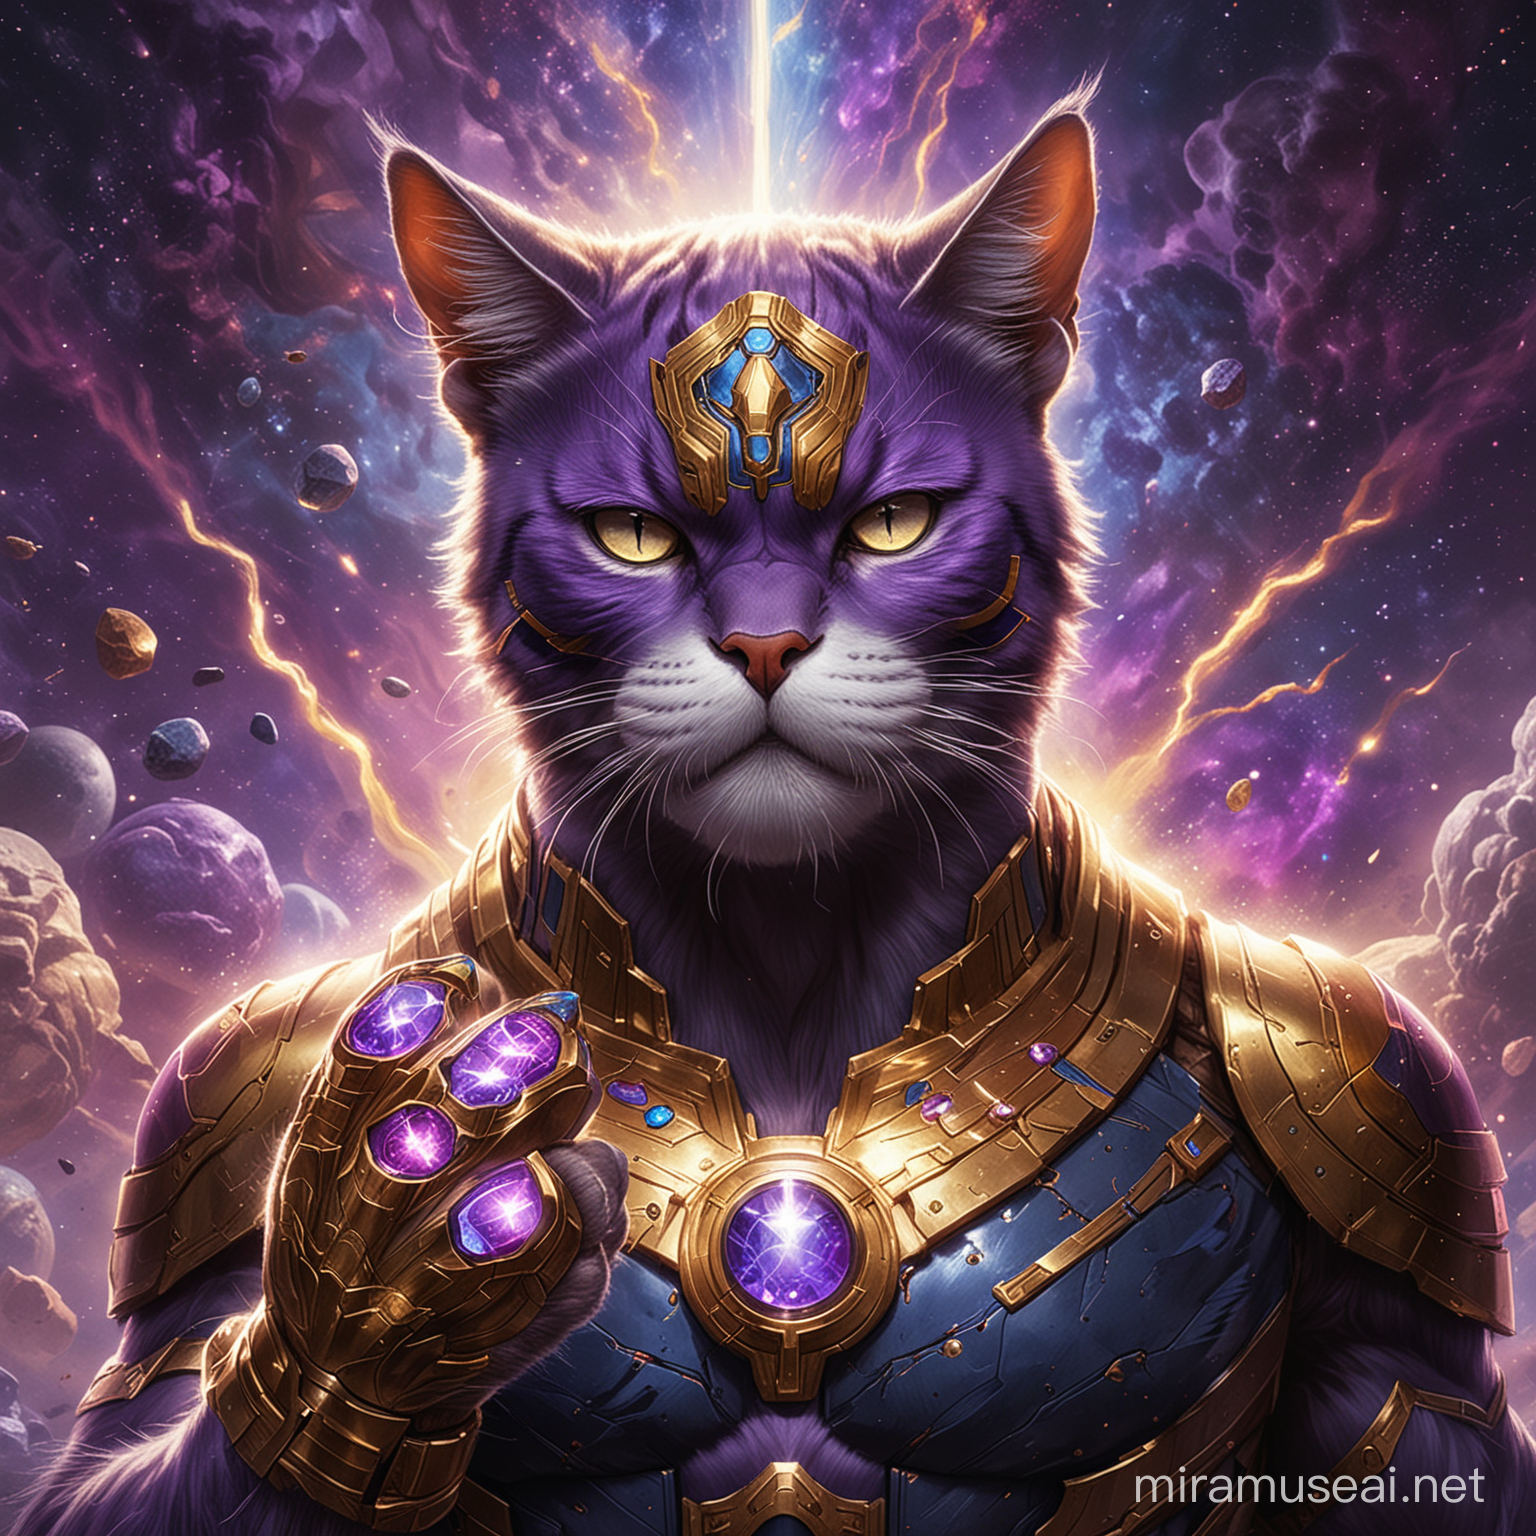 a formidable and majestic cat assumes the guise of Thanos from Marvel, adorned with the Infinity Gauntlet, each of its stones radiating a distinct hue. The cat's fur echoes a regal purple, akin to Thanos' armor, while its feline eyes gleam with cosmic power. With confident poise, the cat brandishes the multicolored Infinity Gauntlet, each gem pulsating with its unique energy. This portrayal captures the feline figure as a dominant force, poised to wield the unfathomable power of the universe, its expression conveying both determination and a hint of sinister resolve.









